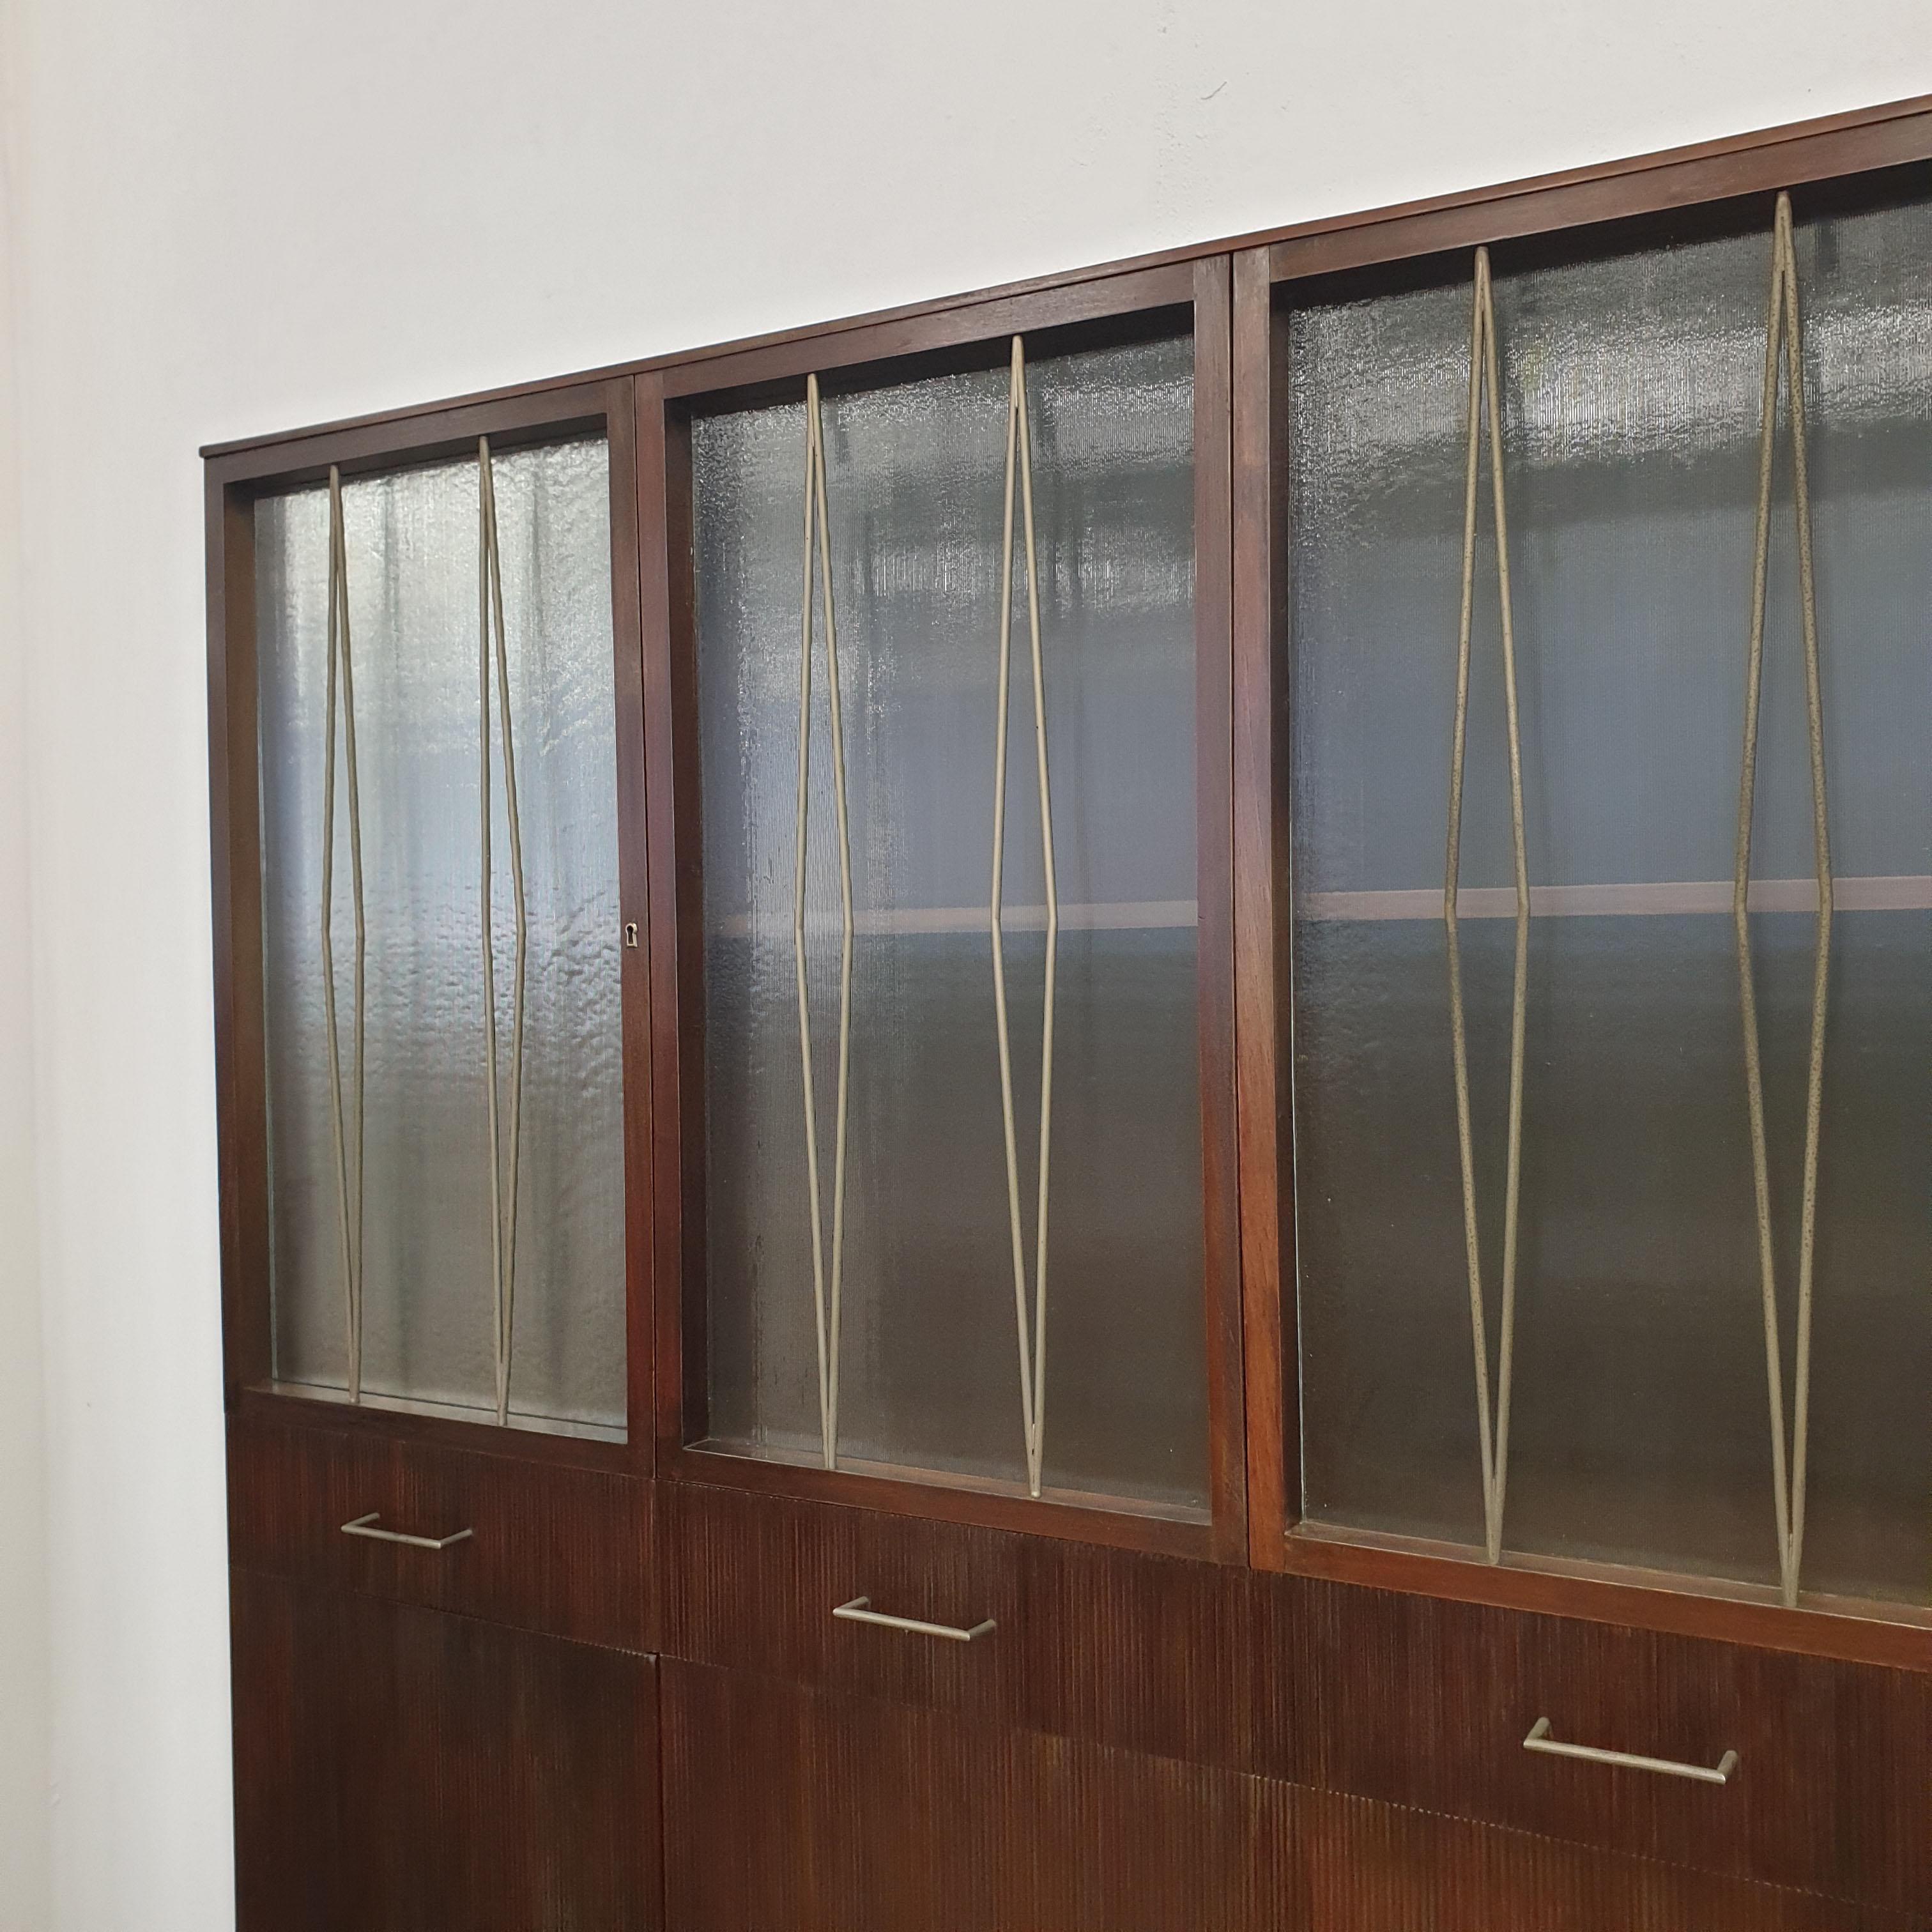 Architects Asnago & Vender Italian Rationalist Cabinet, Italy 1940s In Good Condition For Sale In Milan, IT